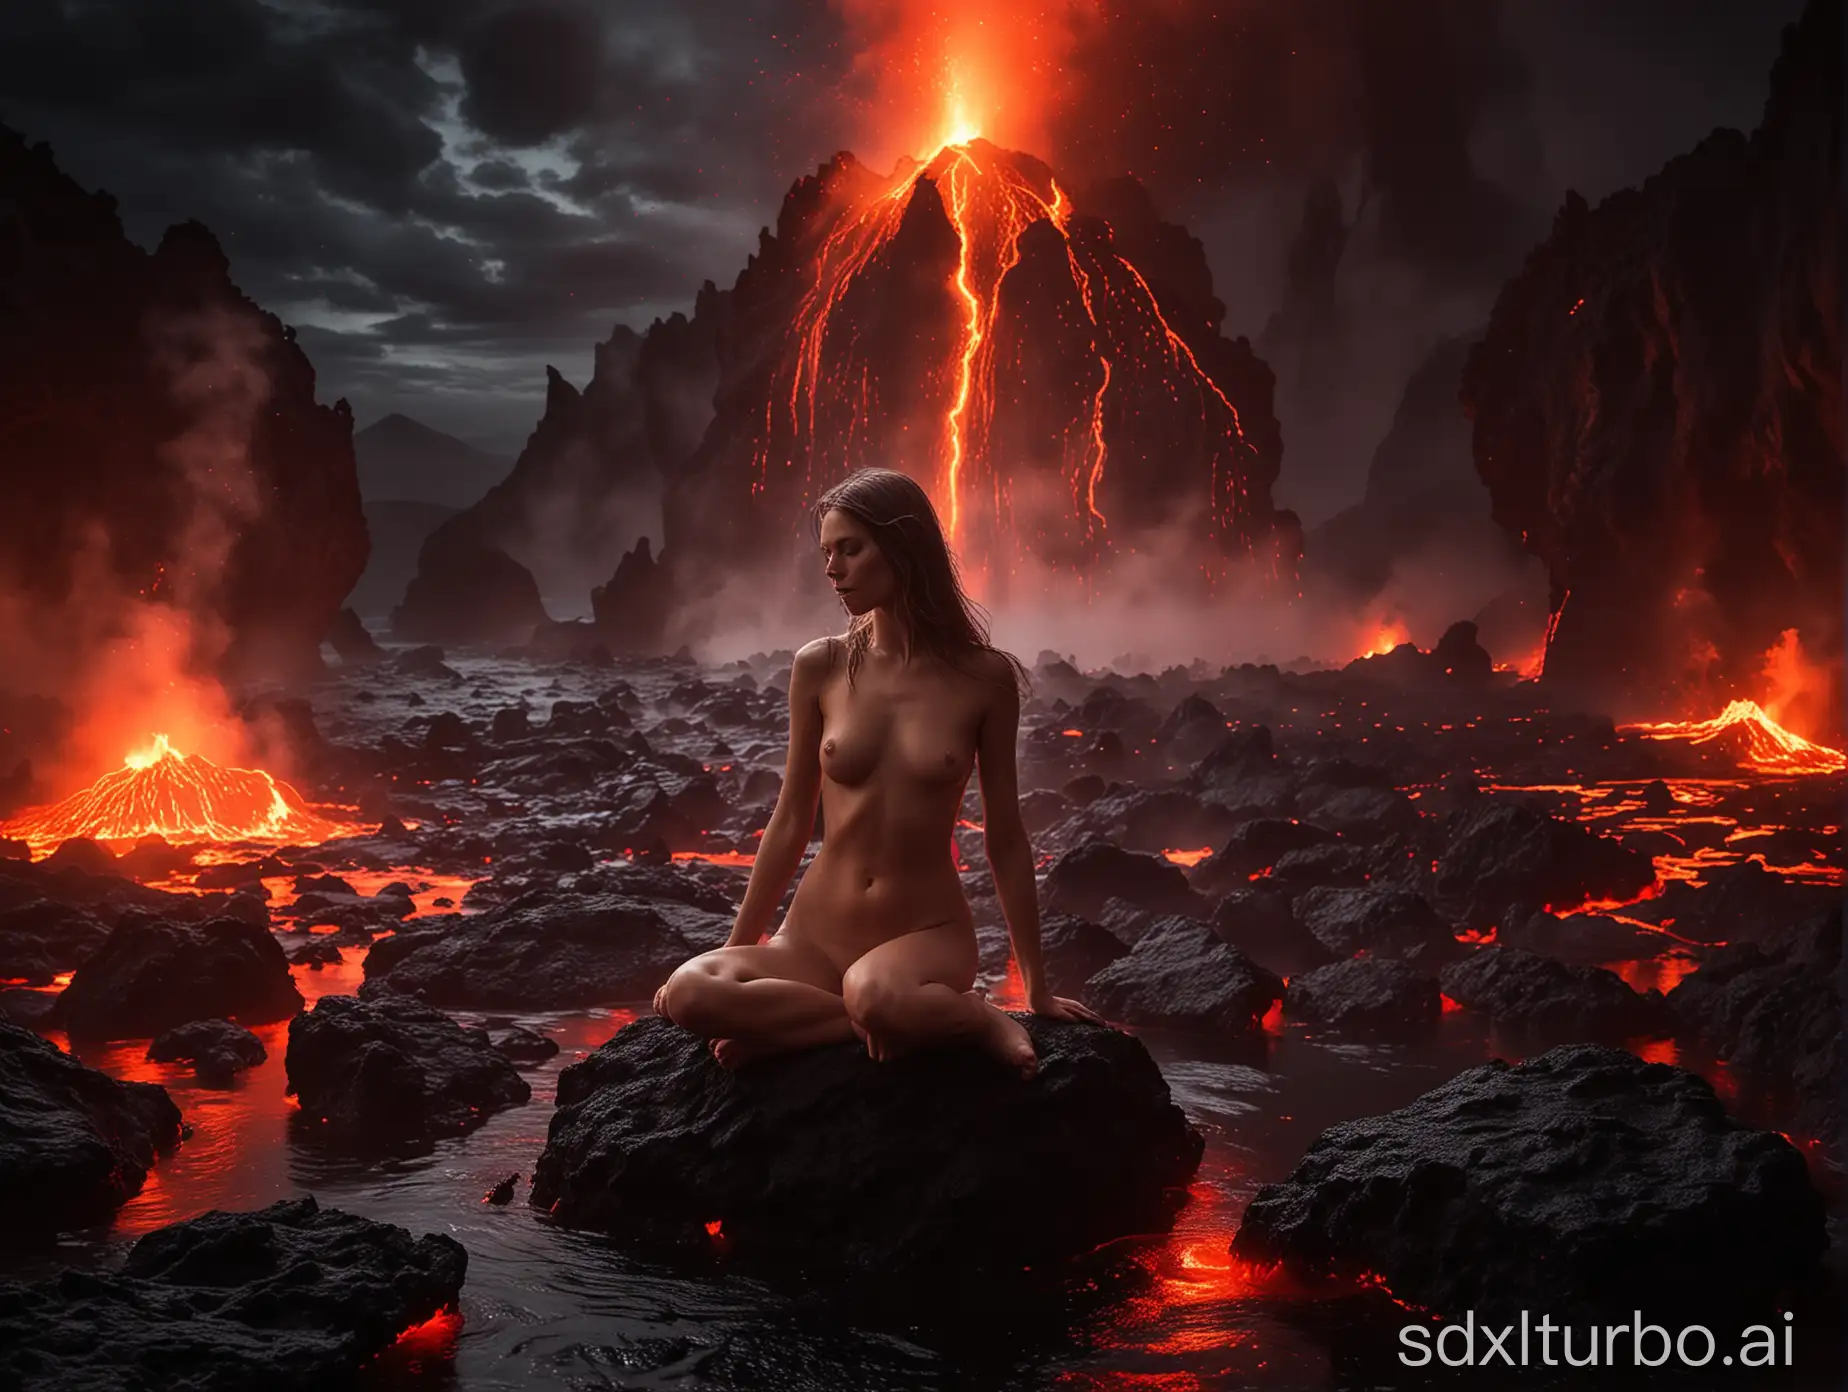 Ethereal-Nude-Female-Model-Amidst-Glowing-Lava-at-Night